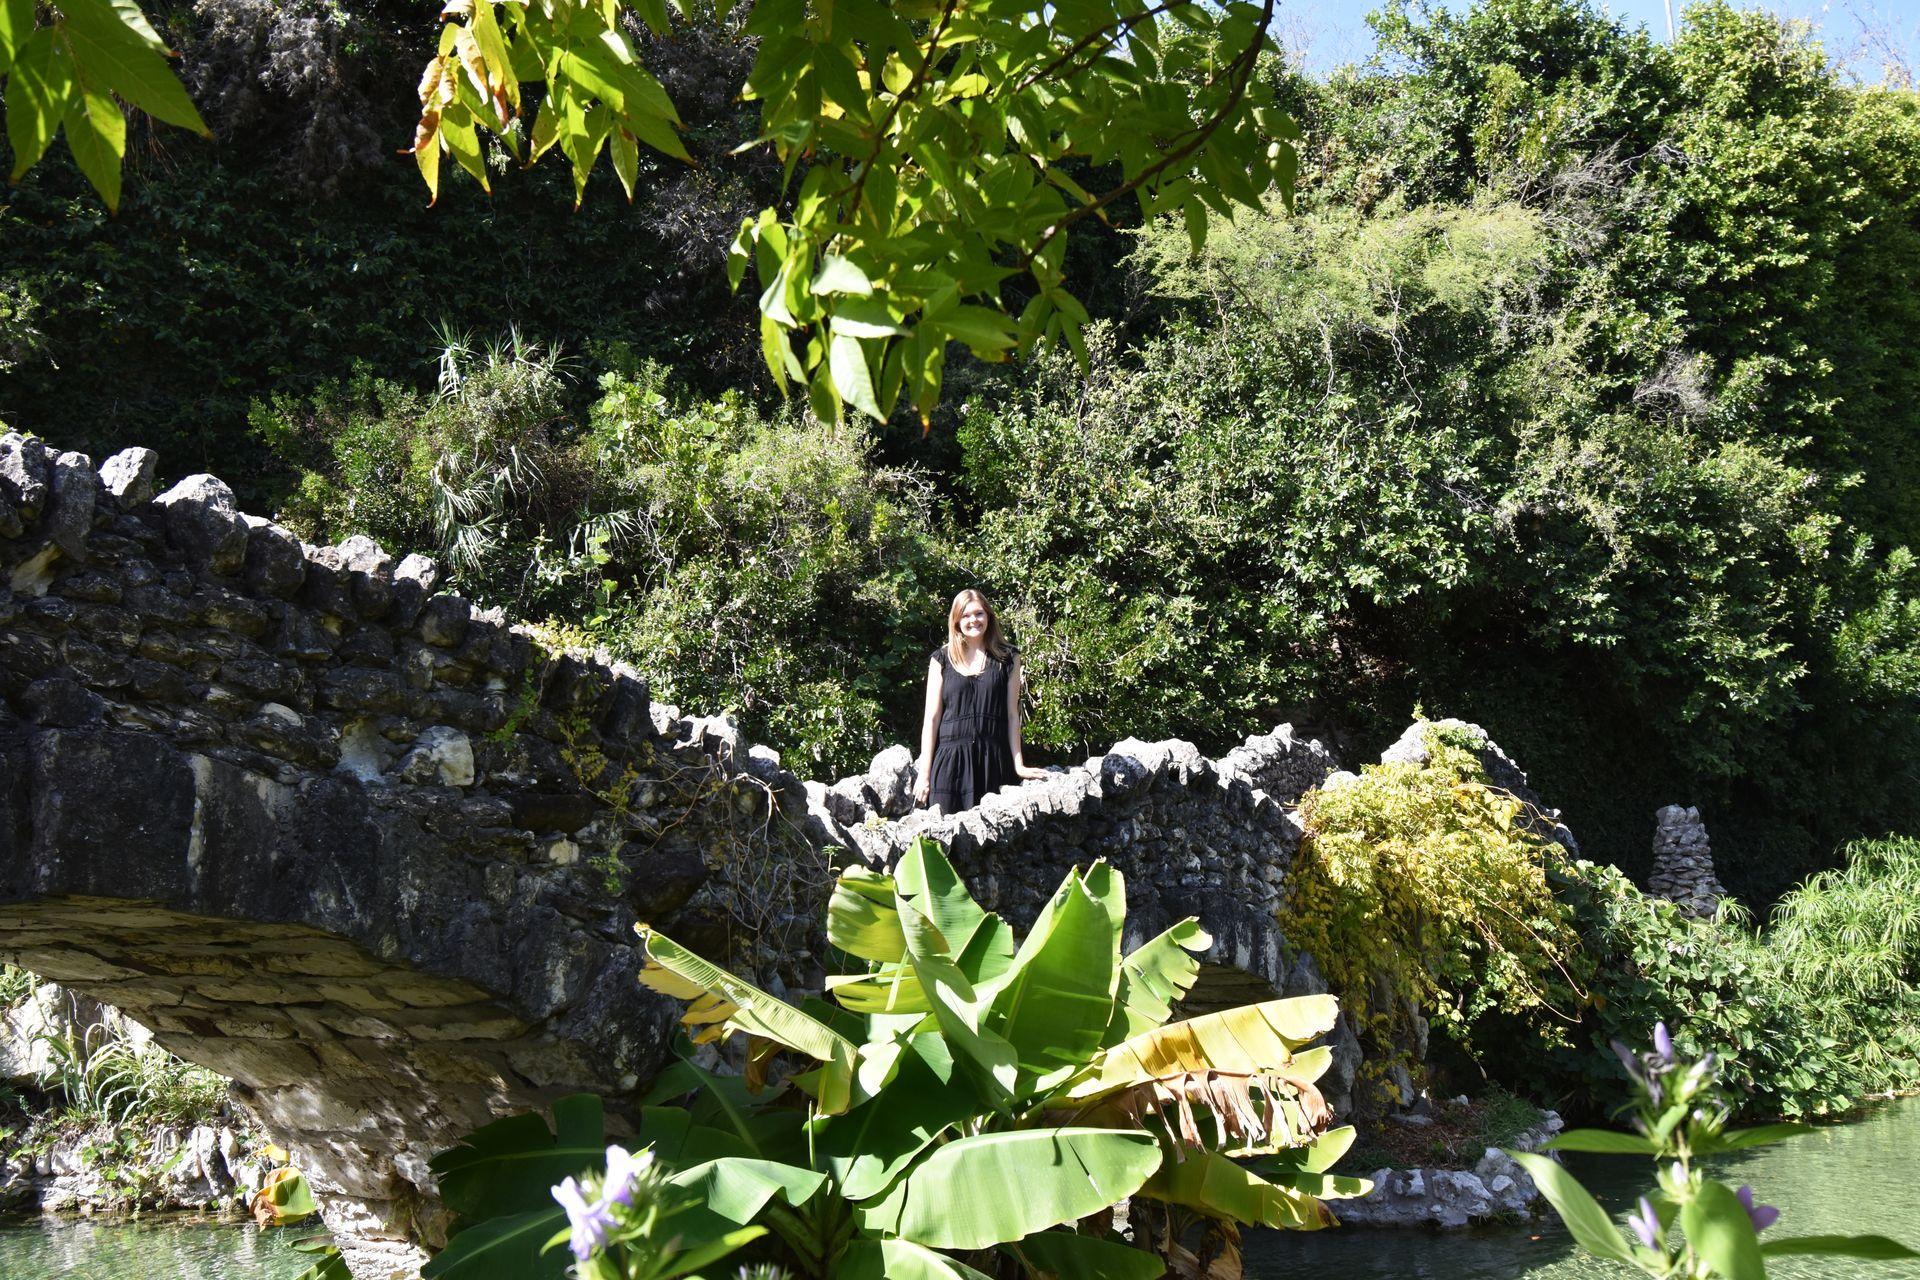 Lydia standing on a stone bridge in the Japanese Tea Garden. There are trees in the background and some large green leaves in the foreground.